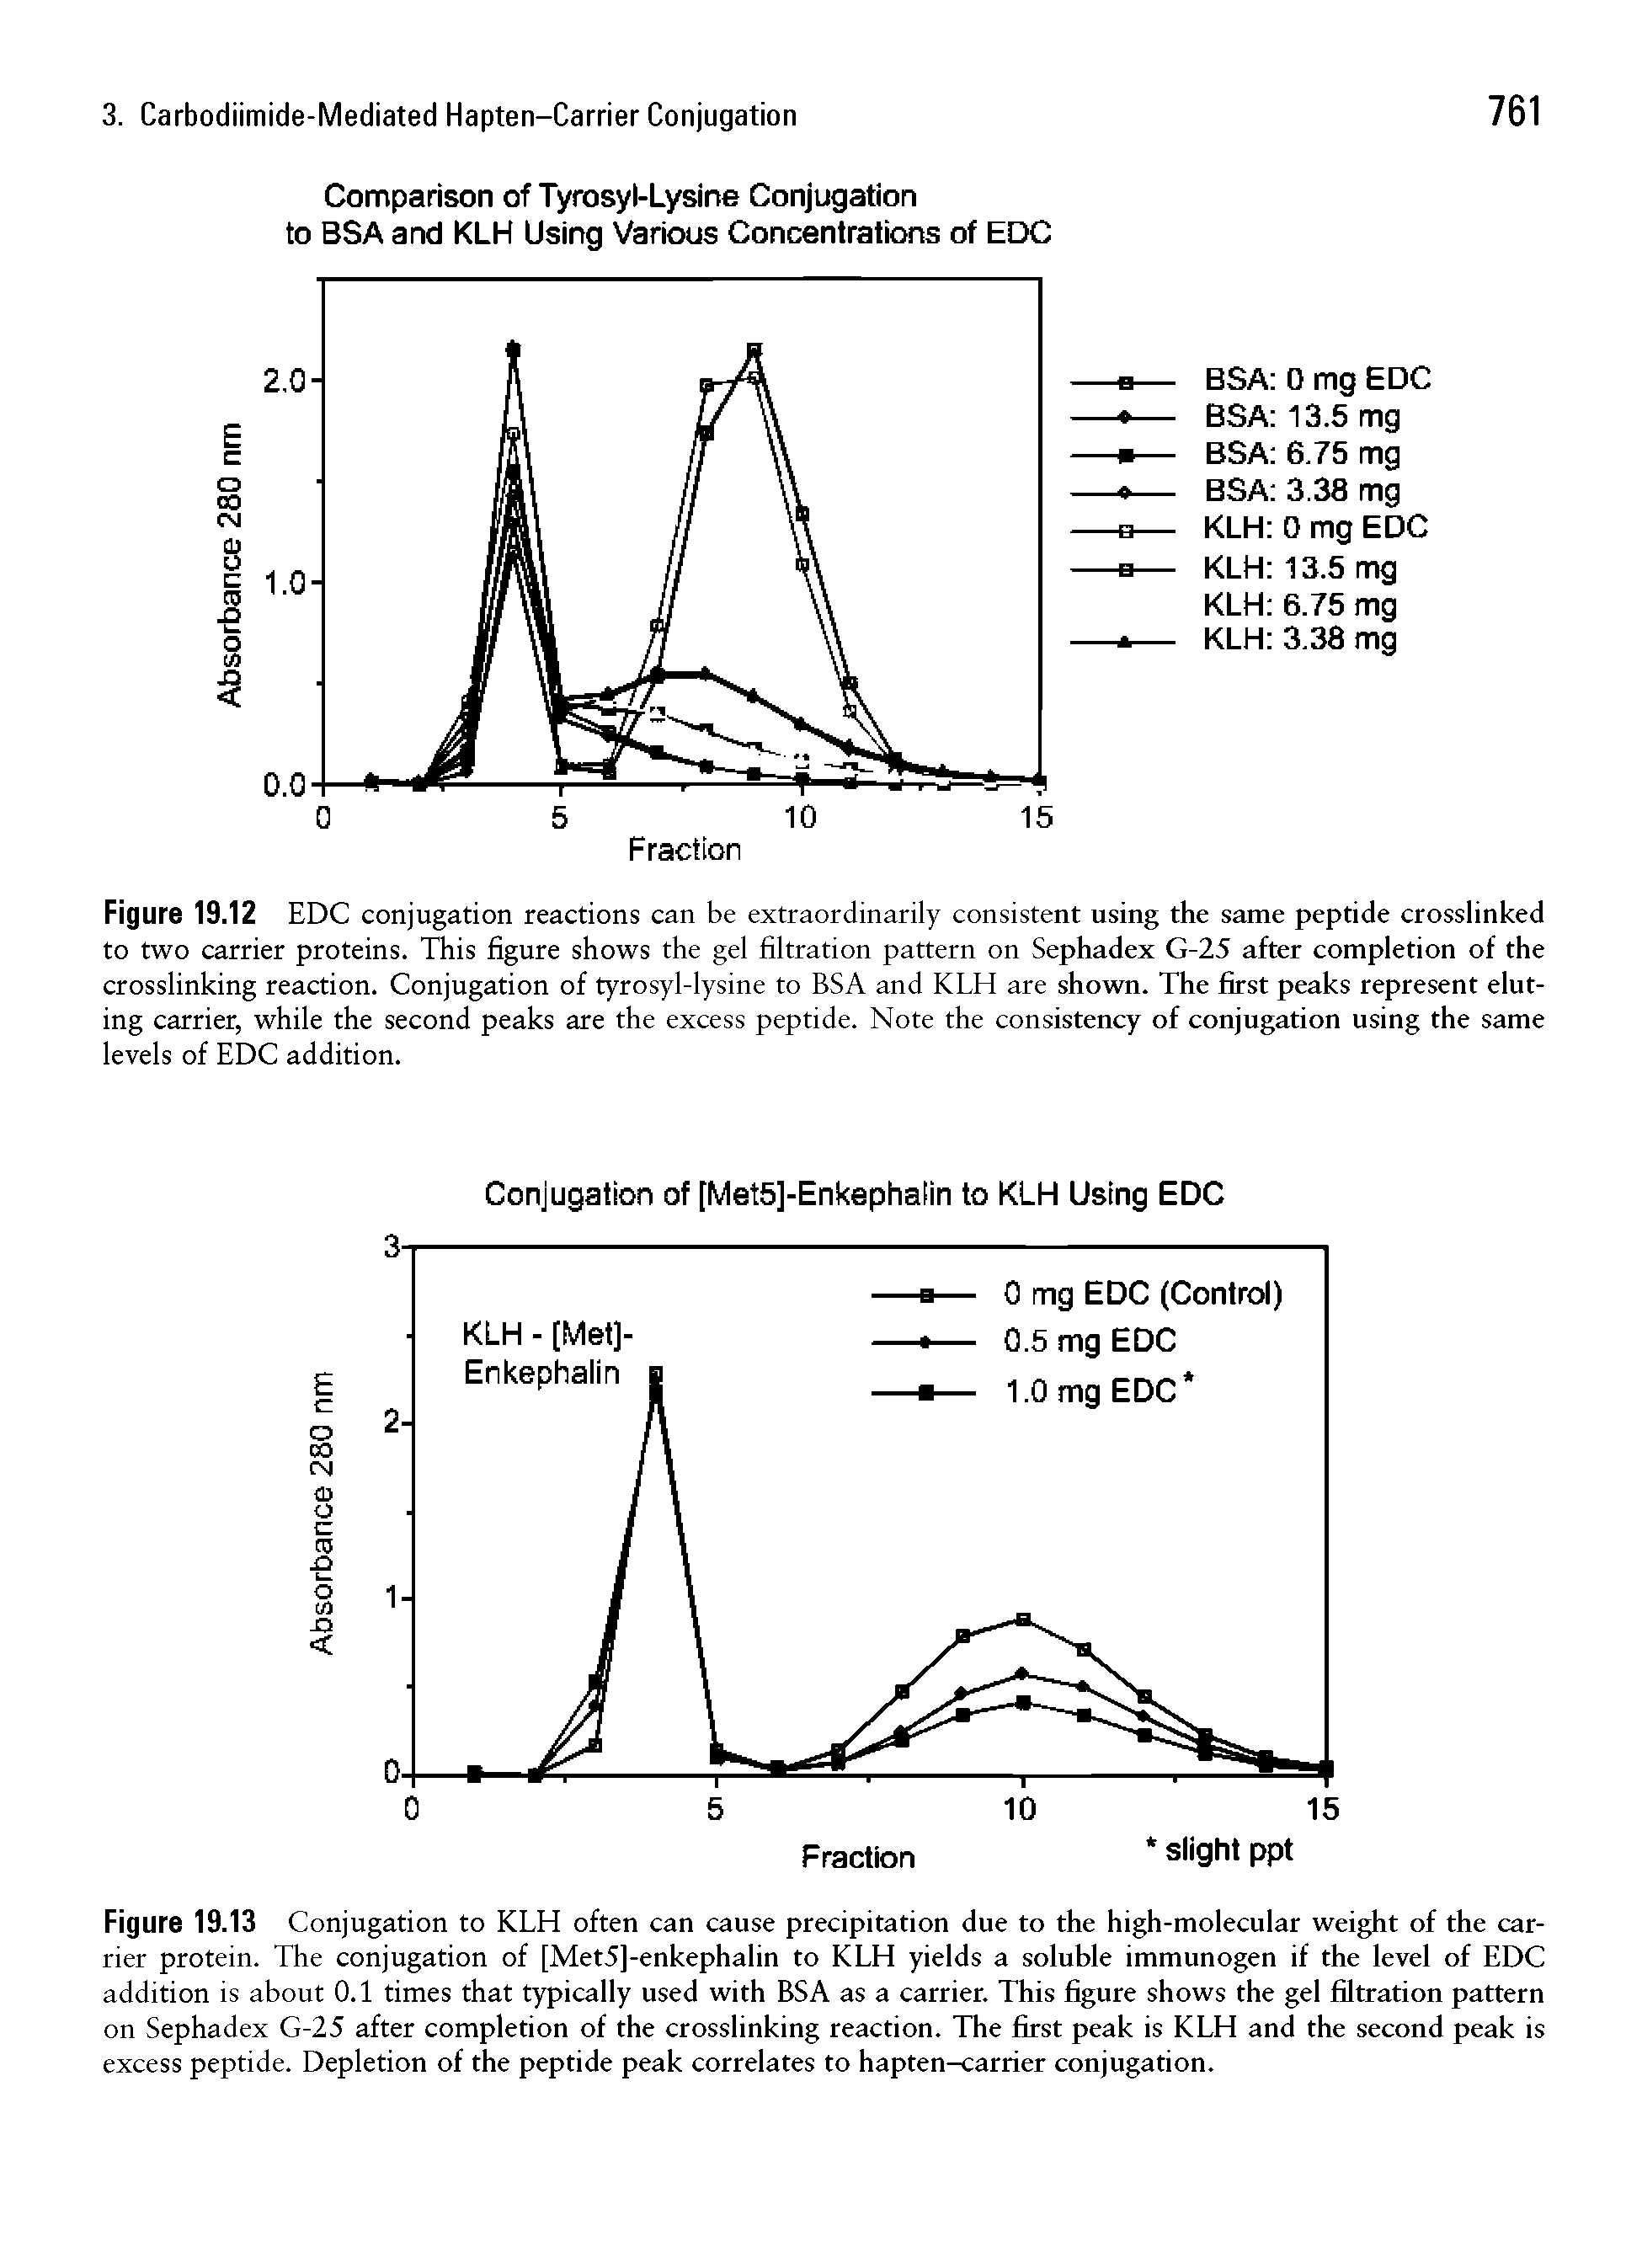 Figure 19.12 EDC conjugation reactions can be extraordinarily consistent using the same peptide crosslinked to two carrier proteins. This figure shows the gel filtration pattern on Sephadex G-25 after completion of the crosslinking reaction. Conjugation of tyrosyl-lysine to BSA and KLH are shown. The first peaks represent eluting carrier, while the second peaks are the excess peptide. Note the consistency of conjugation using the same levels of EDC addition.